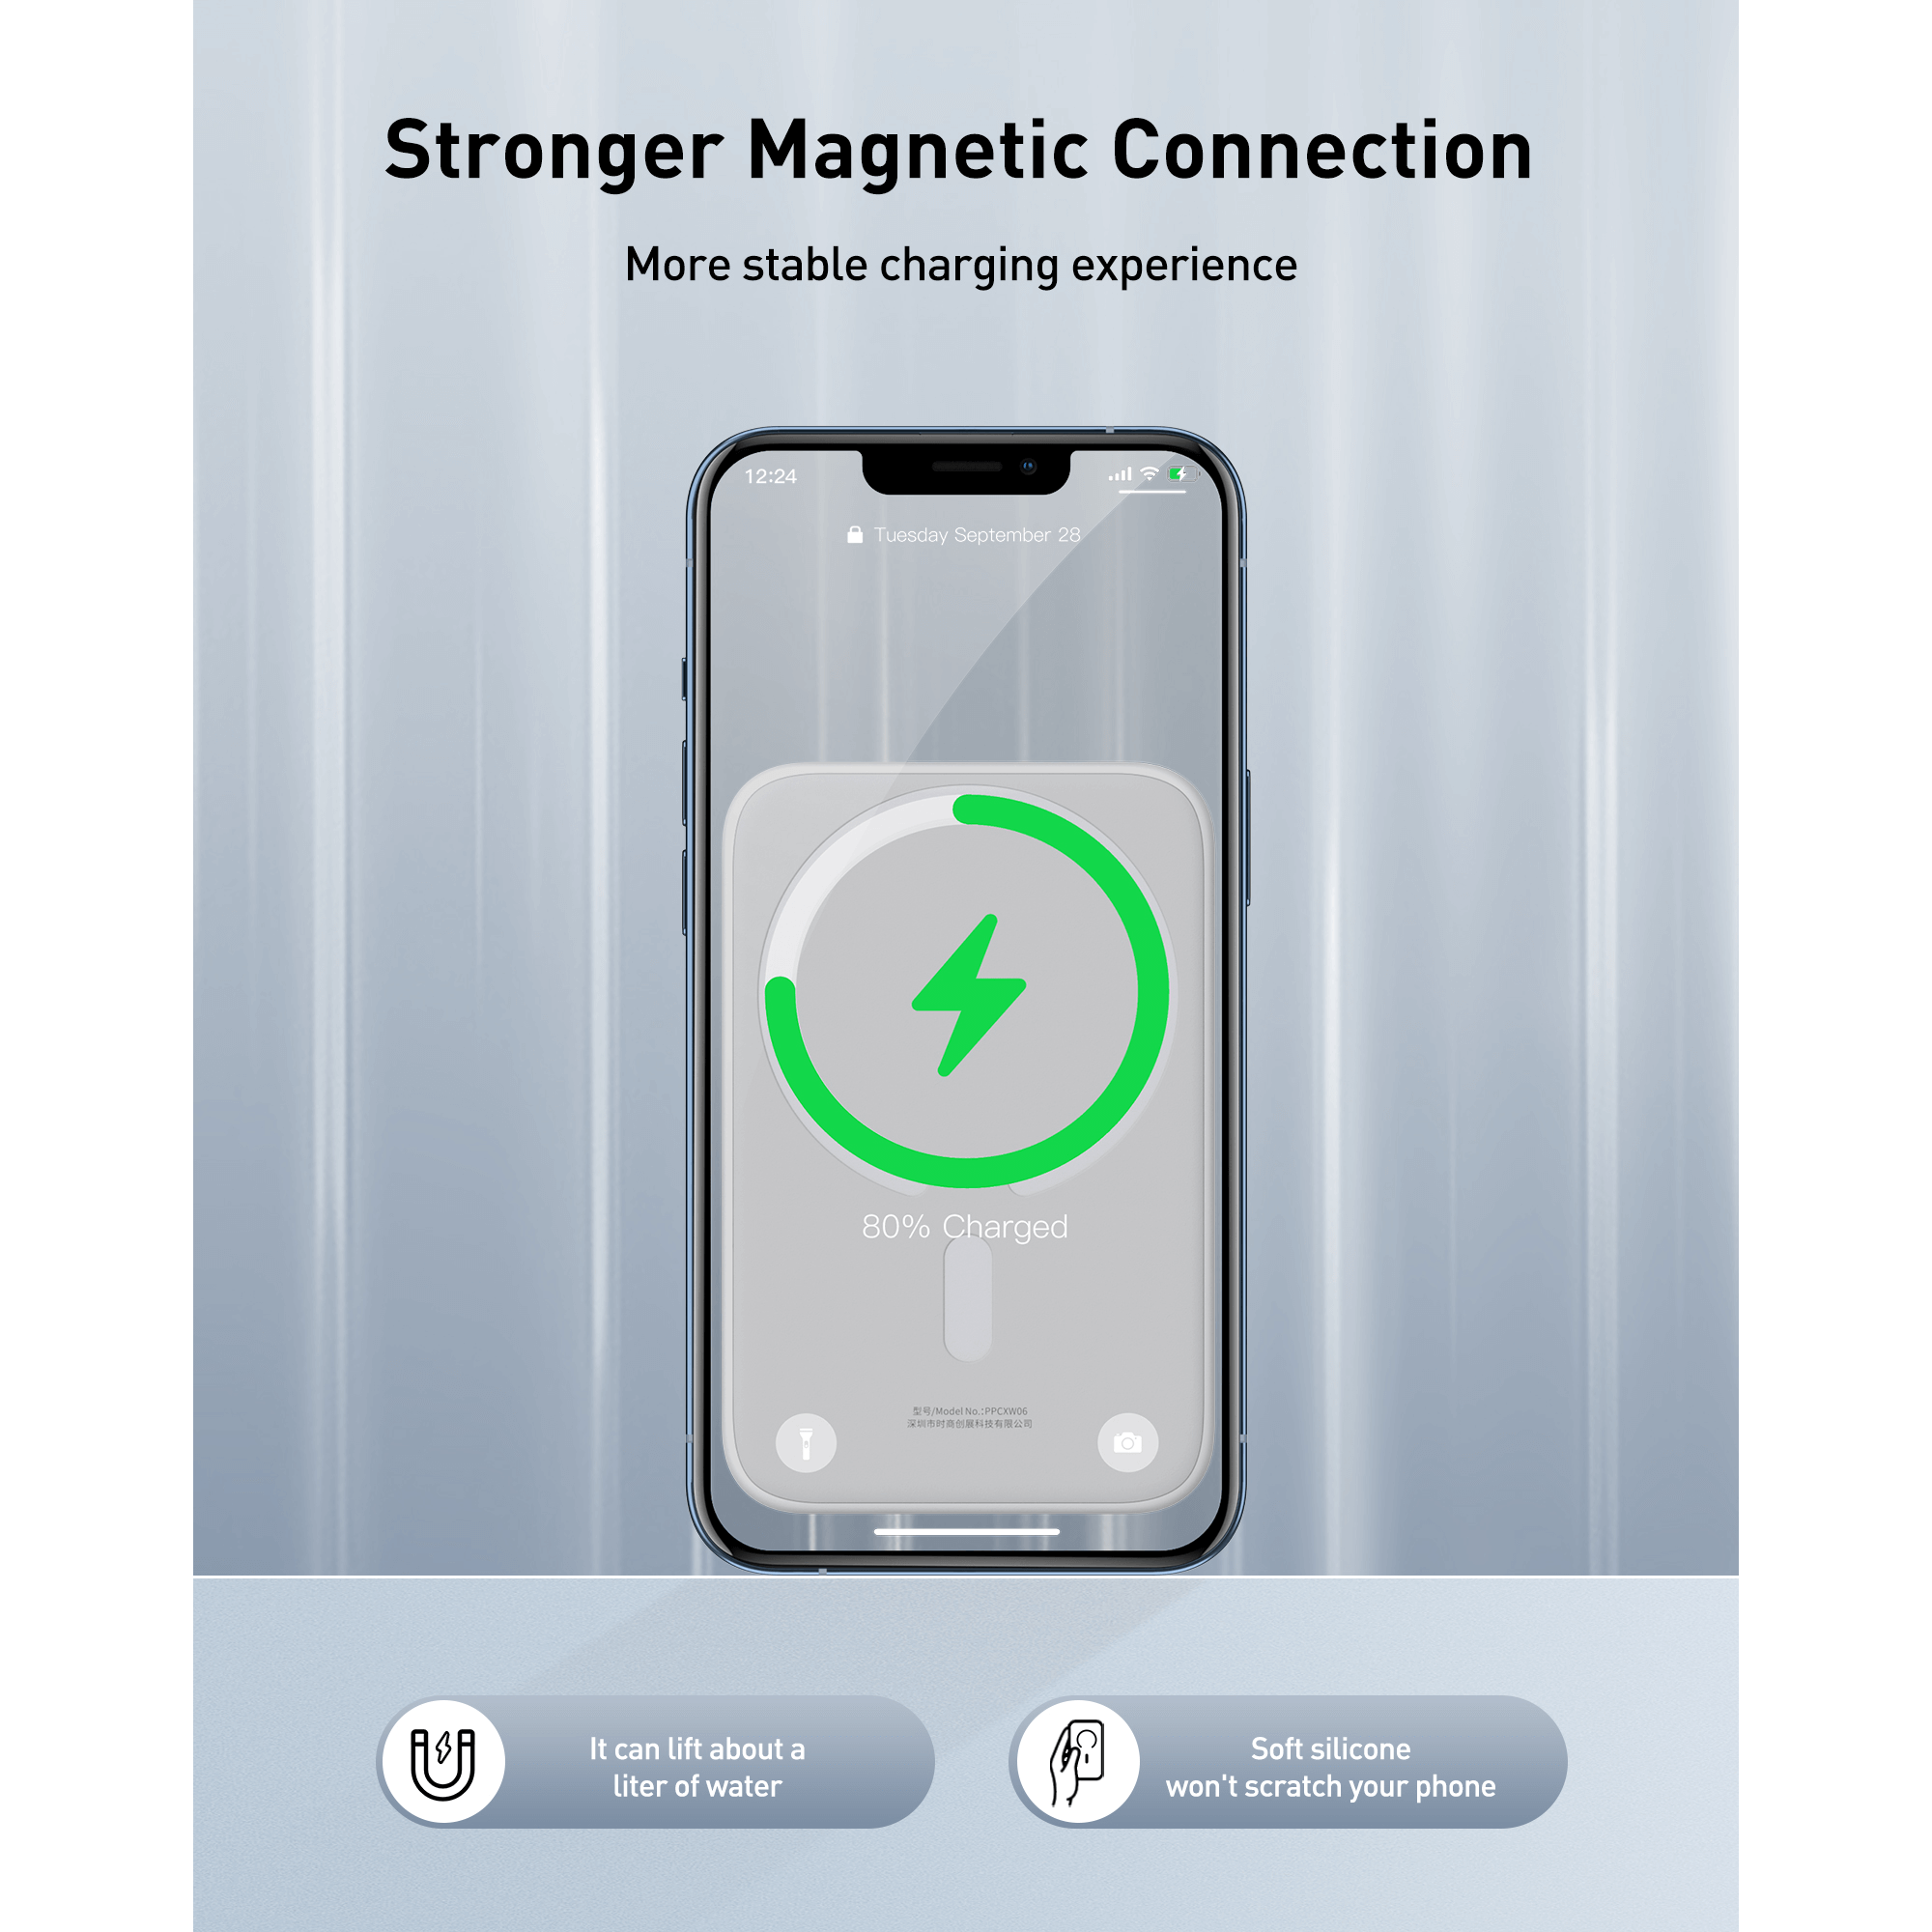 Baseus Magnetic Power Bank 6000mAh 20W Battery Pack Wireless Portable Charger